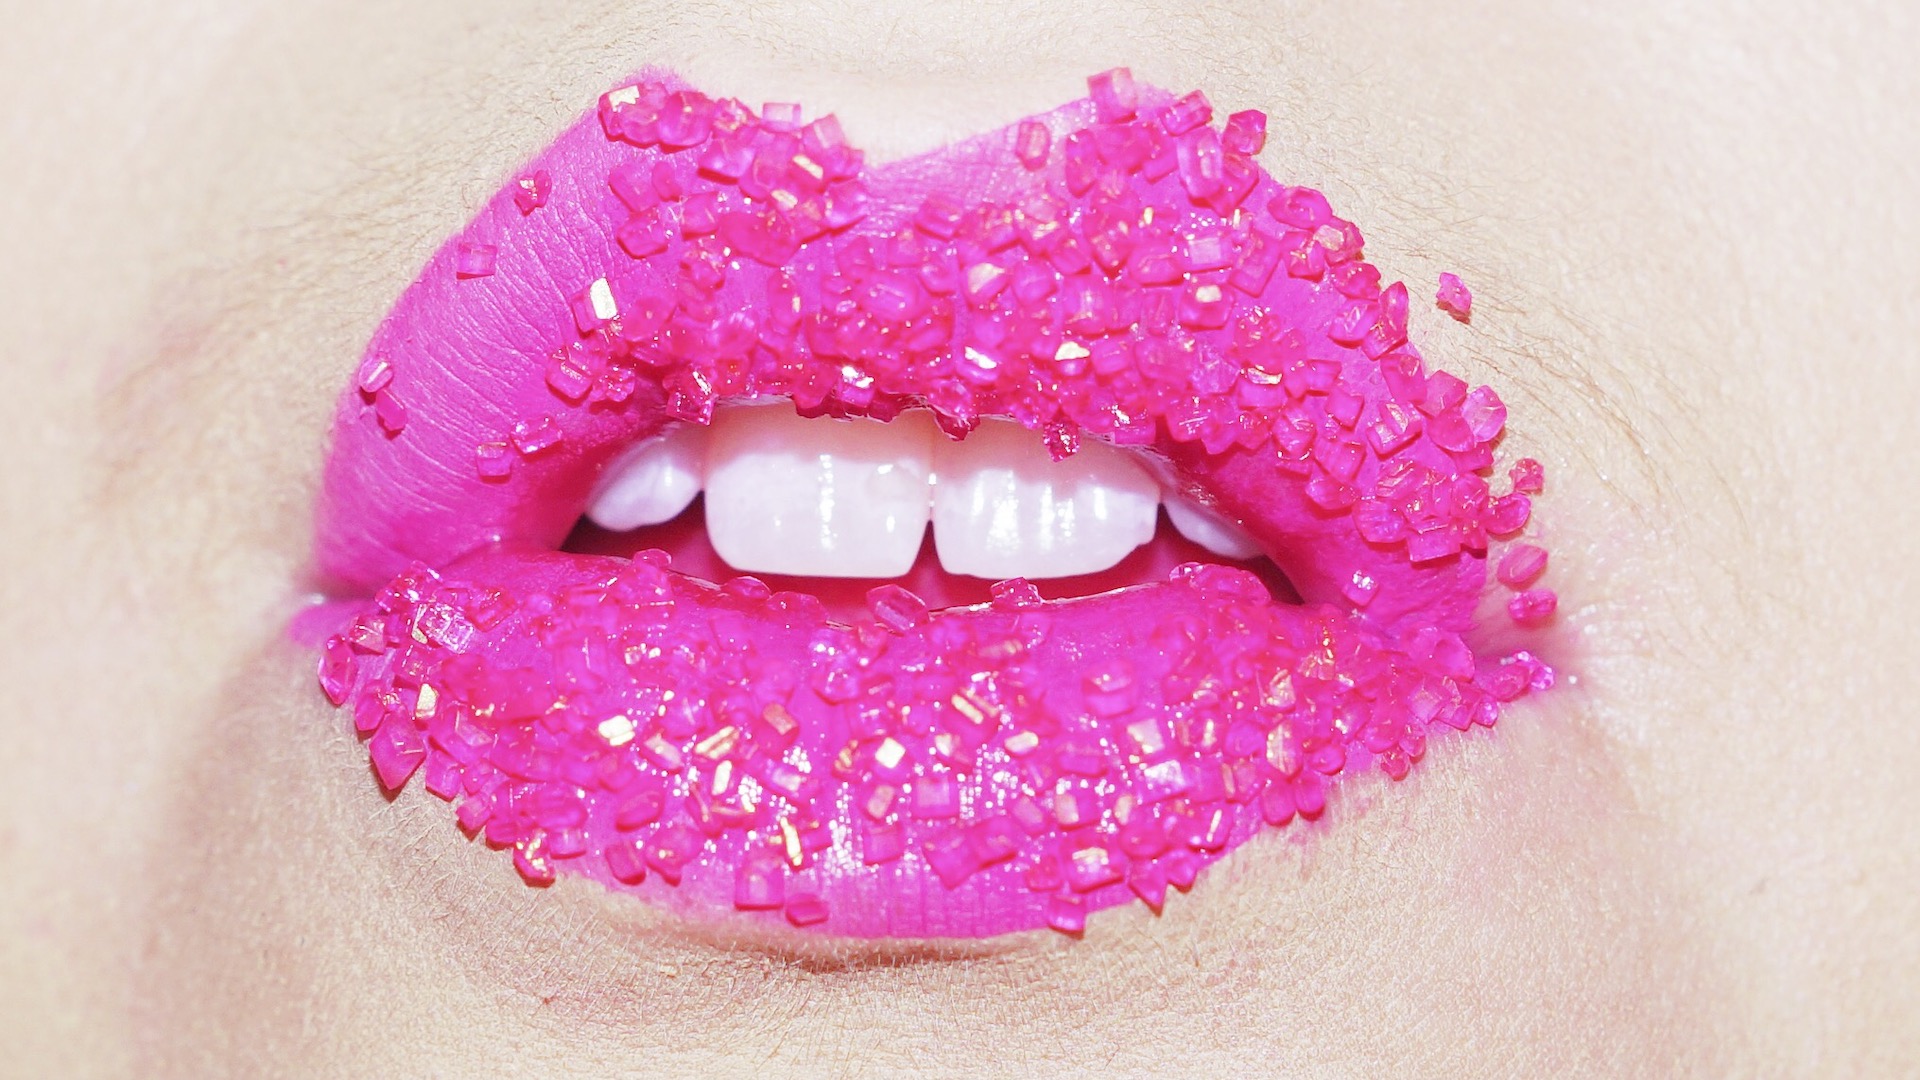 Bright pink lips with jewels on top